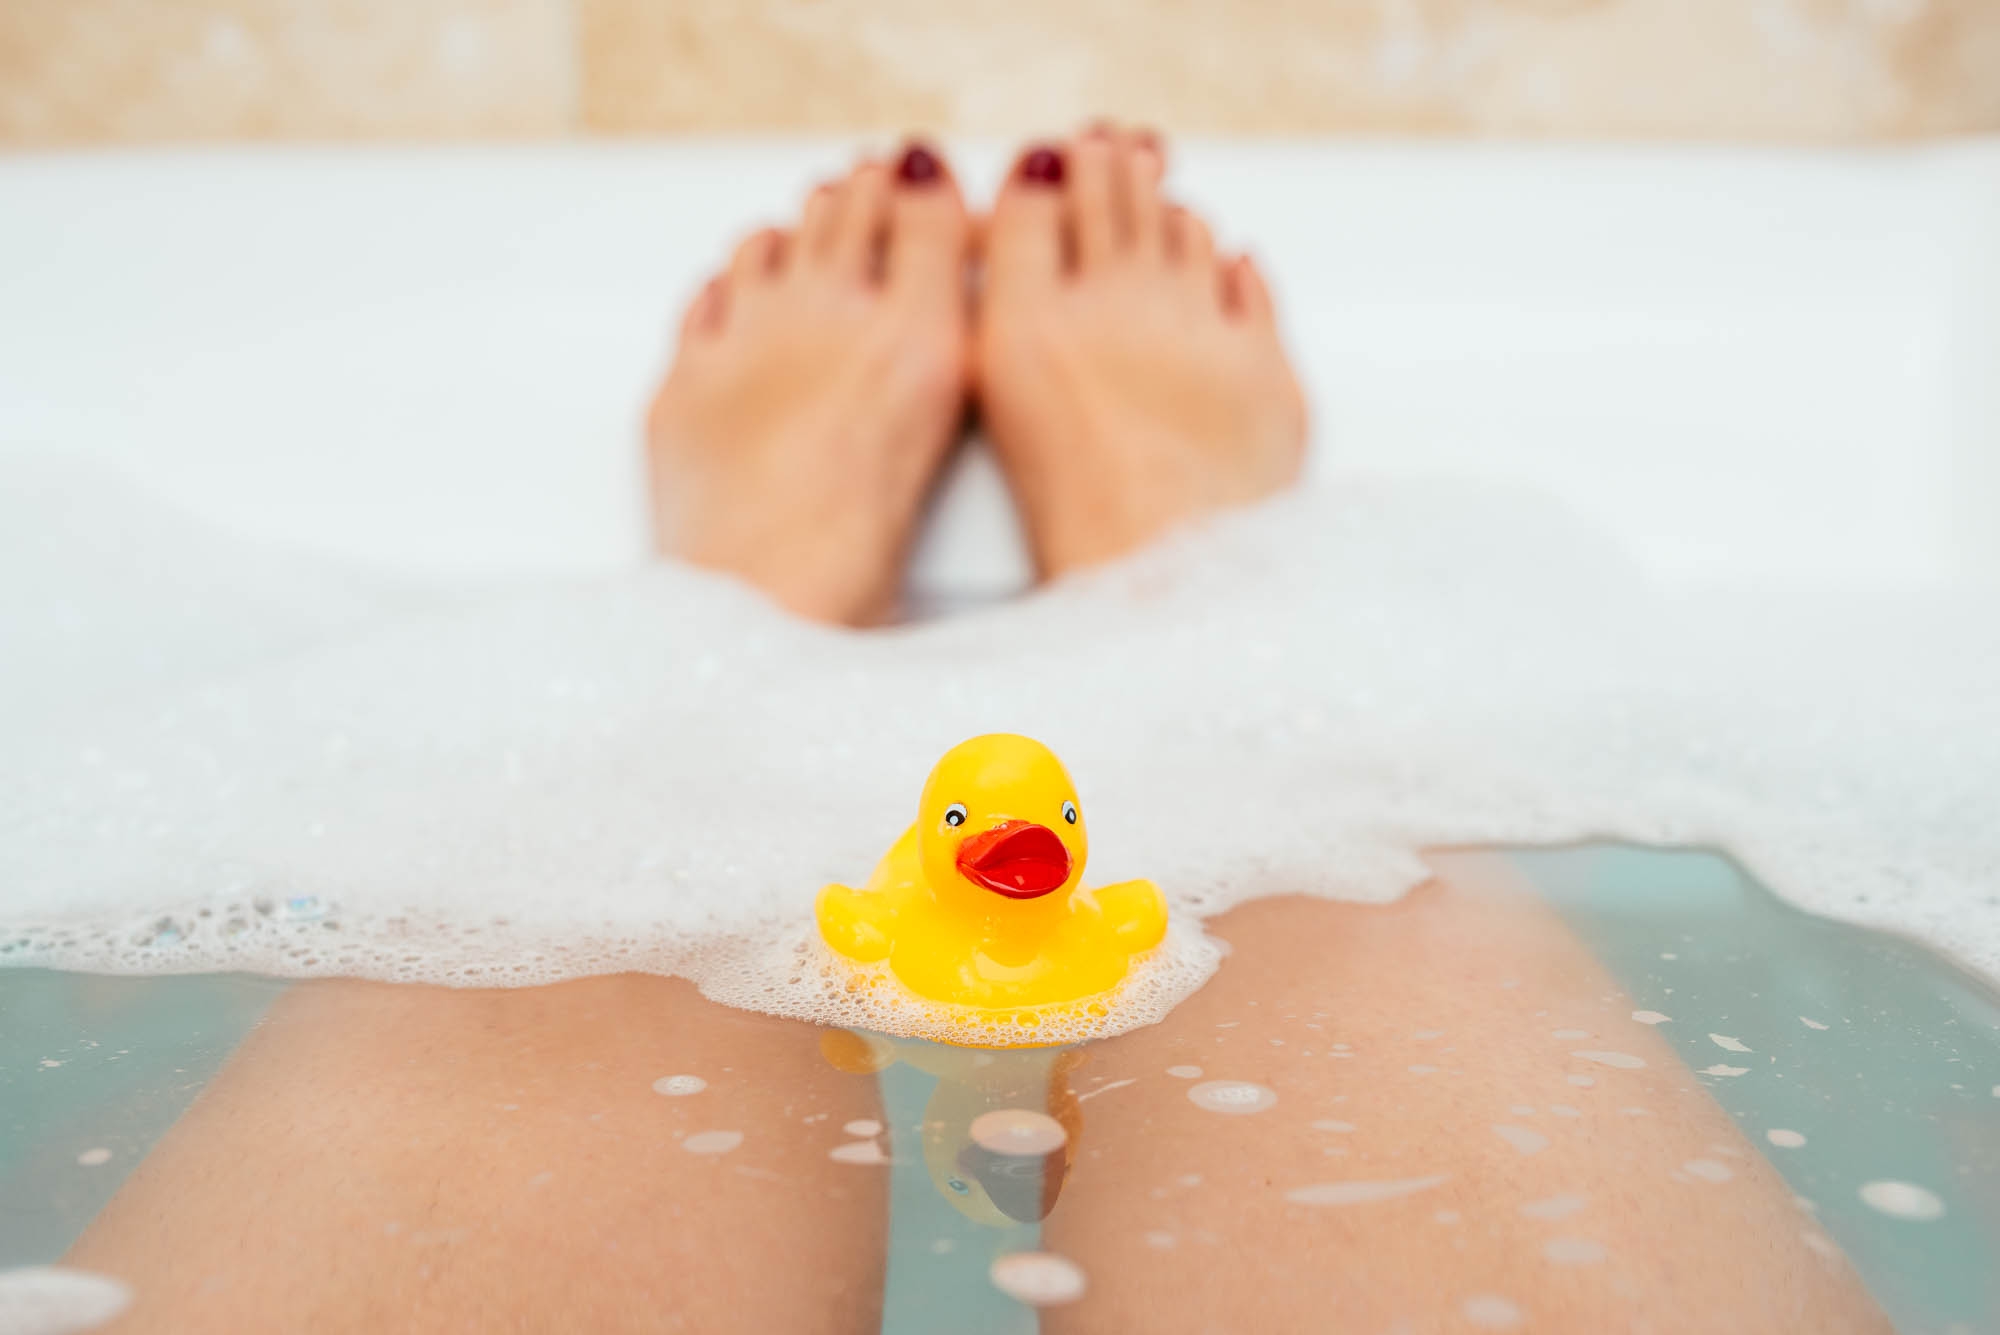 A Photo of a yellow duck floating in a bathtub with feet rising up